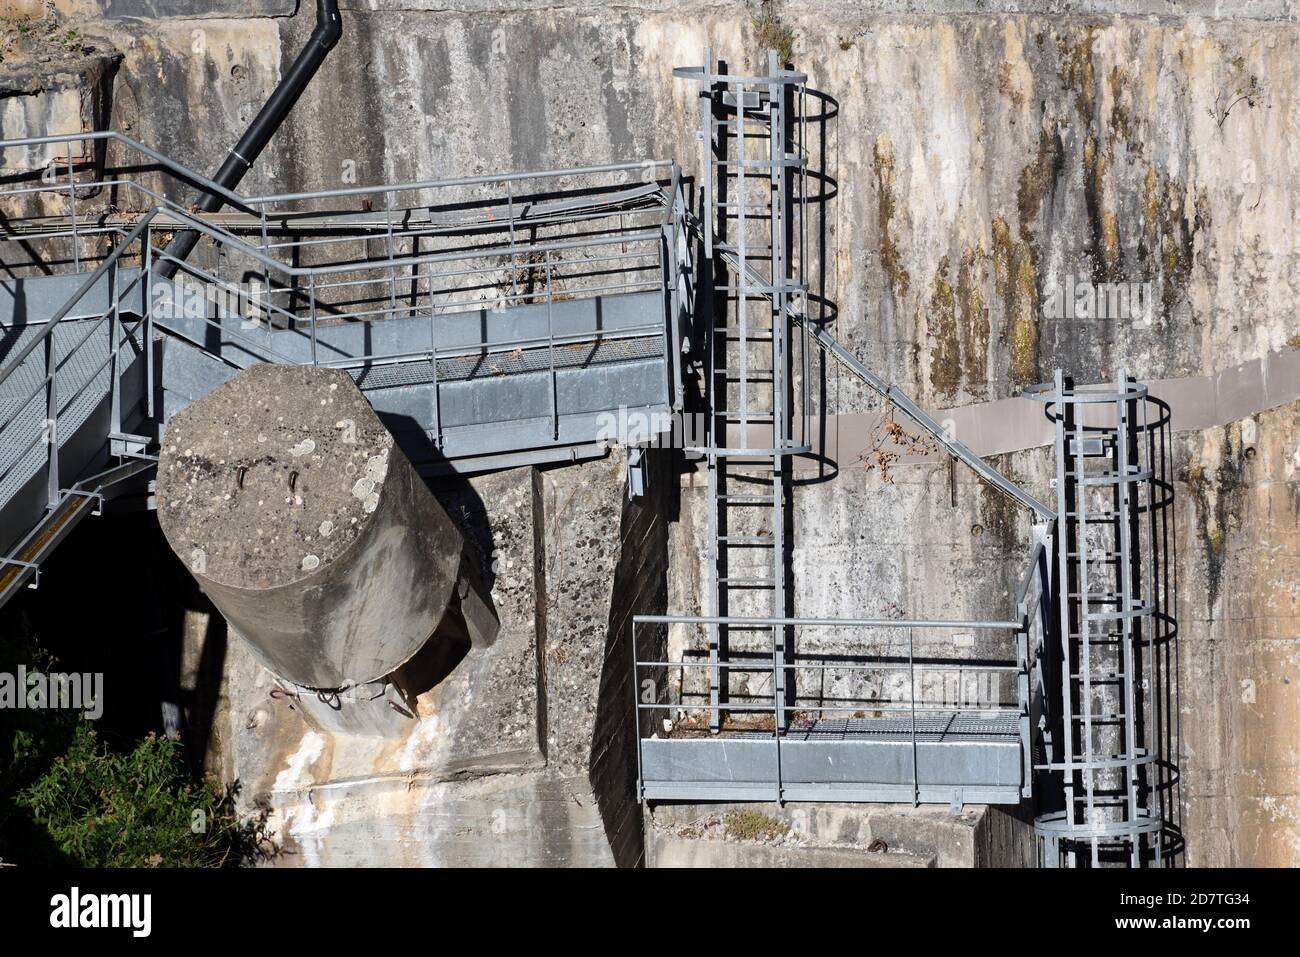 Industrial Security Ladders, Wall Ladders, Safety Ladders & Work Platforms Fixed to Concrete Wall of Castillon Dam or Barrage Provence France Stock Photo